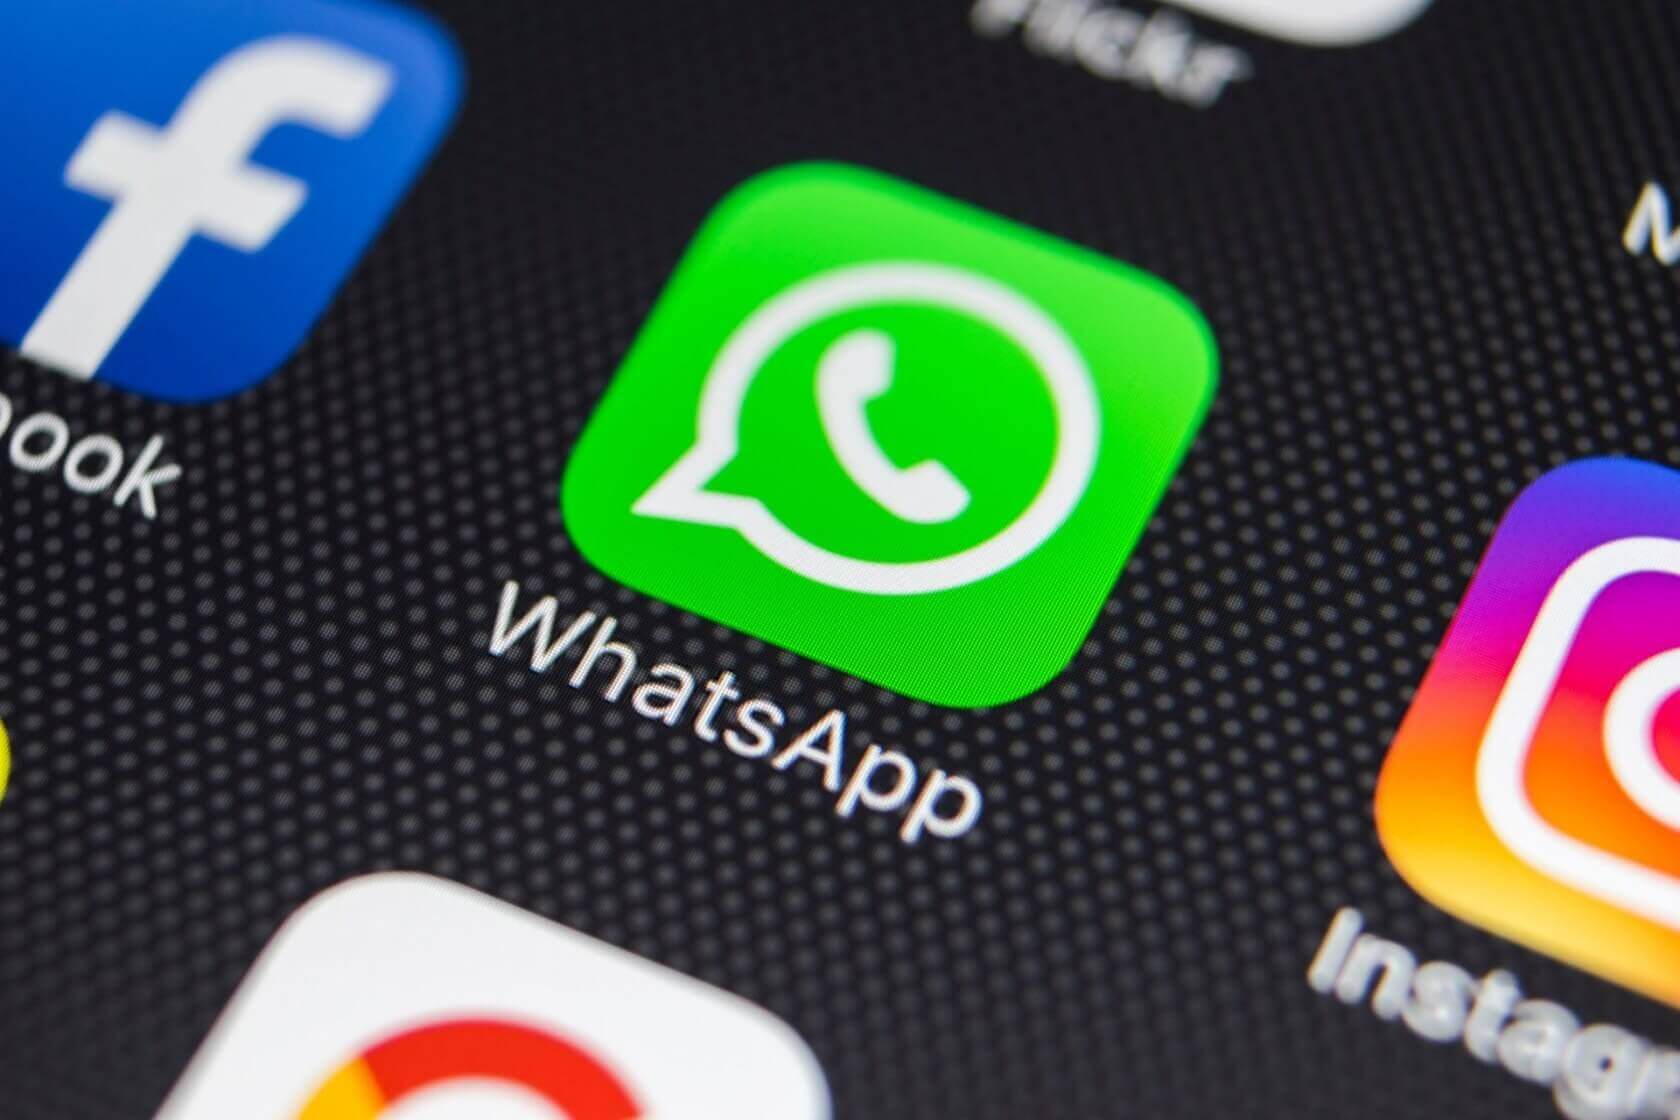 WhatsApp ends official support for Microsoft's ill-fated Windows Phone